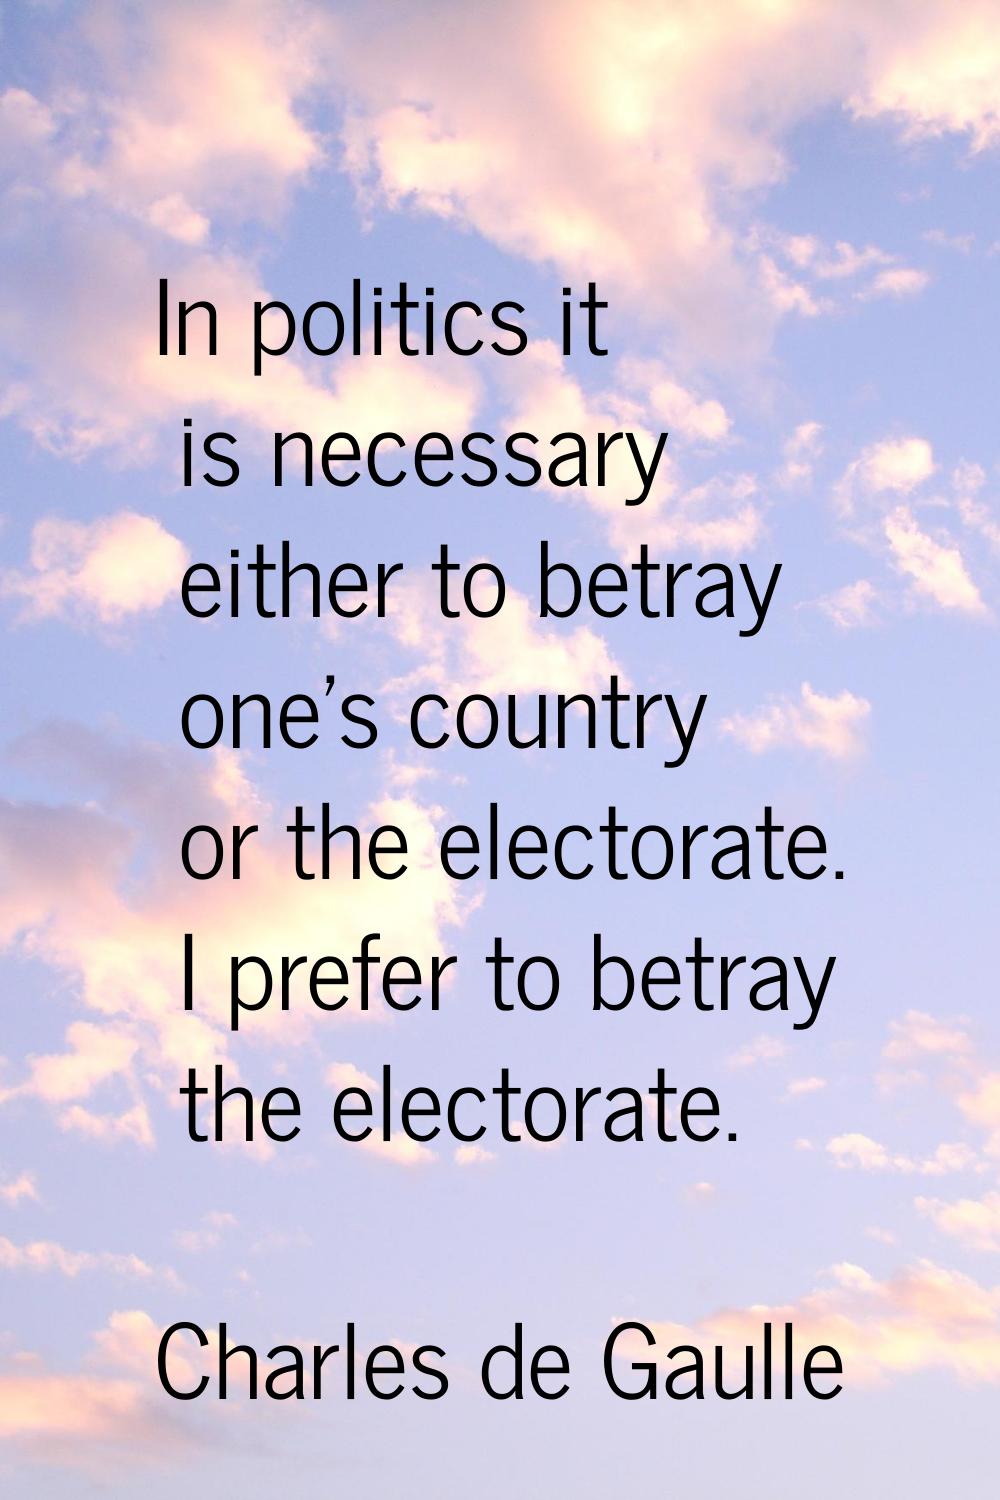 In politics it is necessary either to betray one's country or the electorate. I prefer to betray th